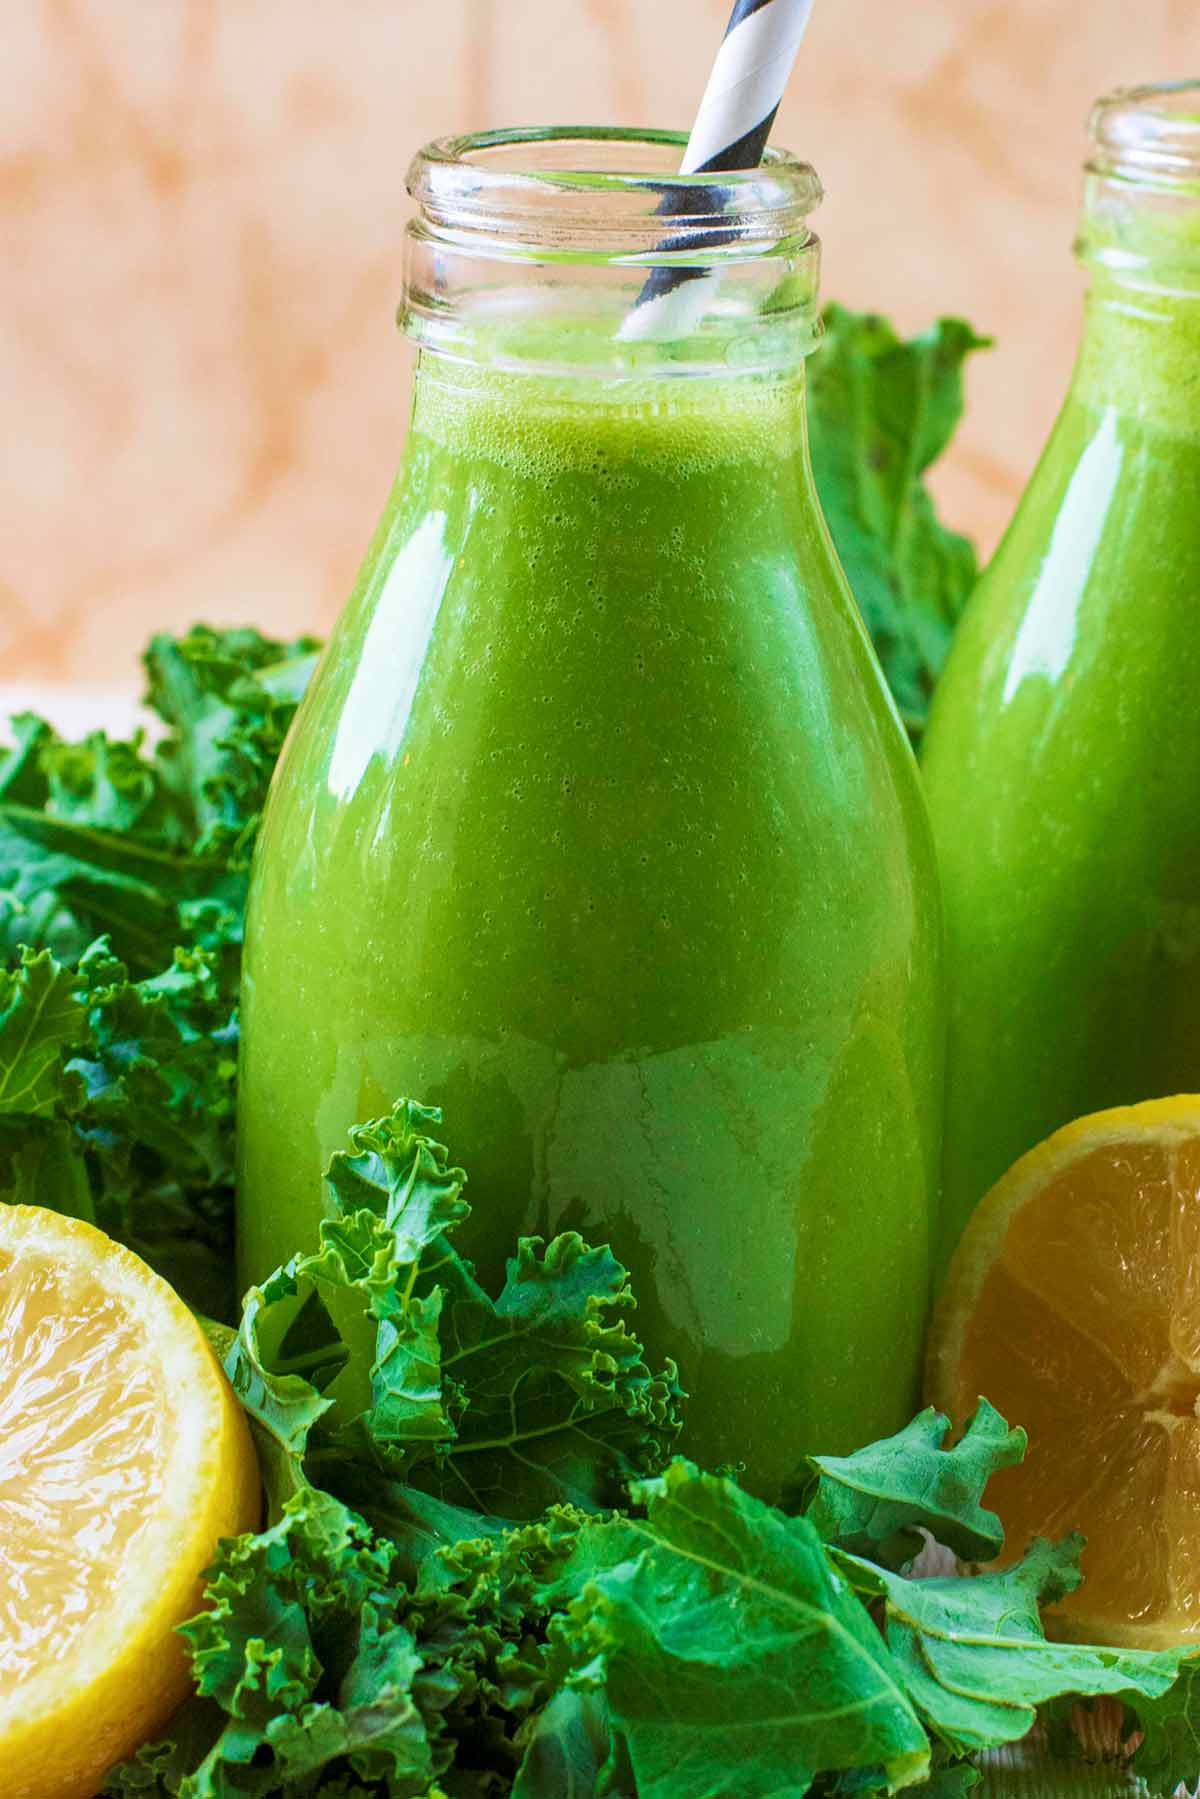 A small glass bottle containing a green smoothie. Green leaves and fruit are surrounding it.